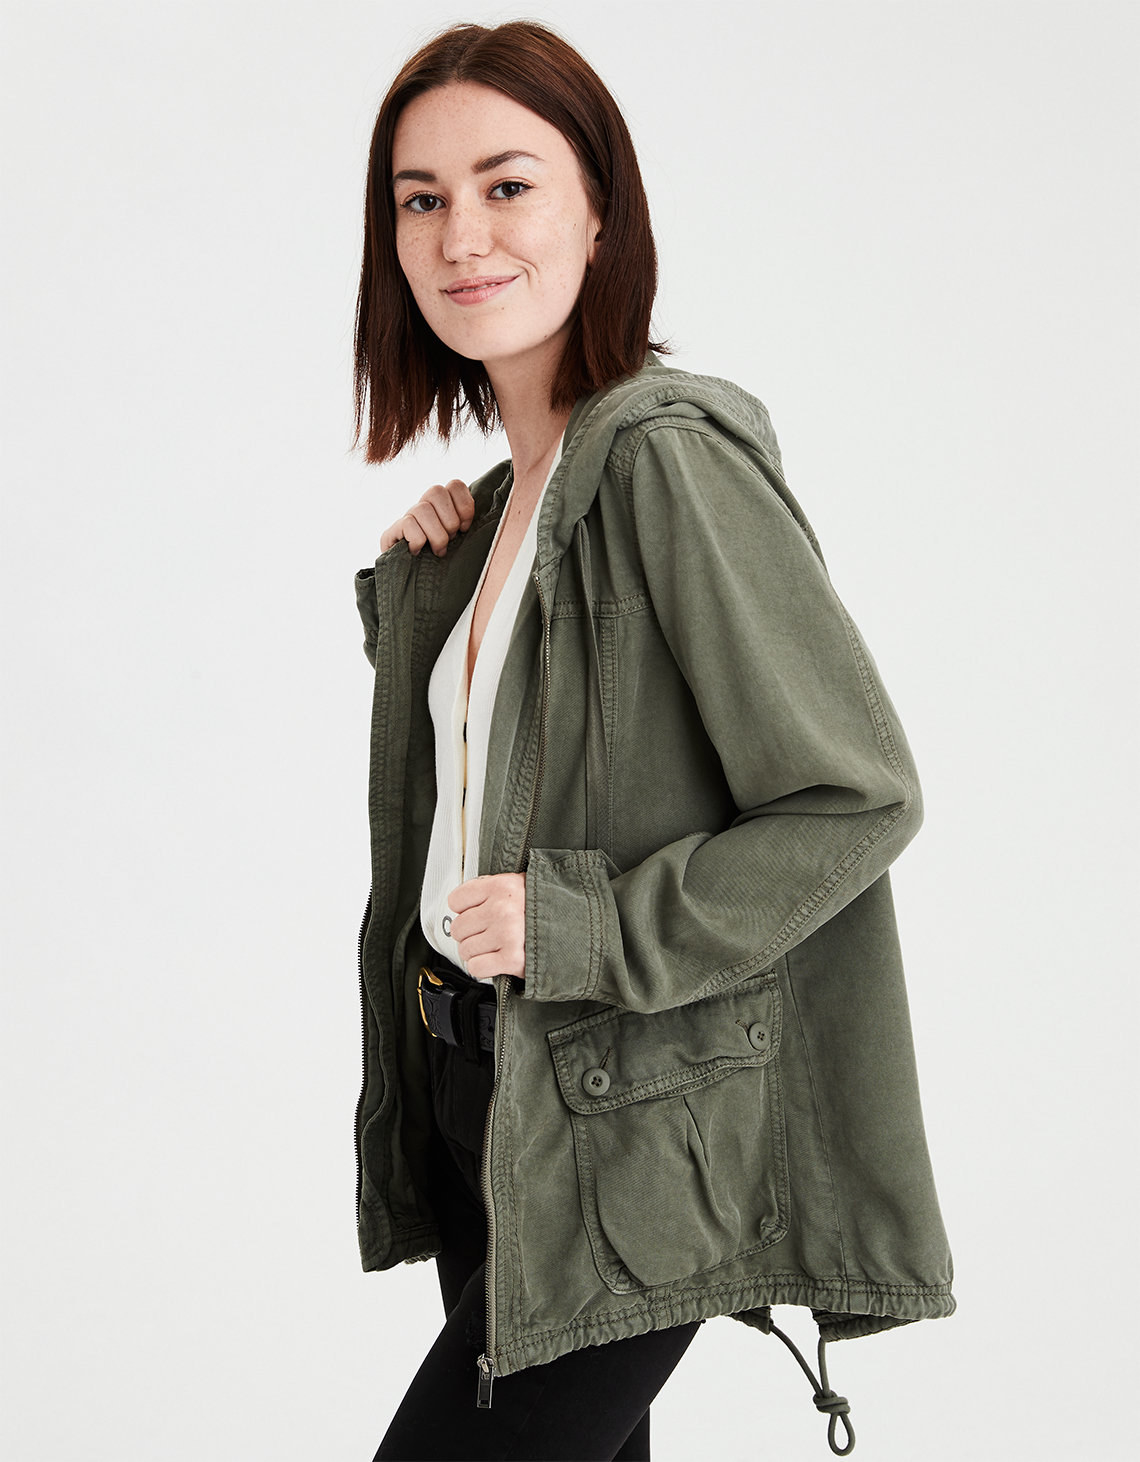 27 Light Jackets To Layer With This Spring